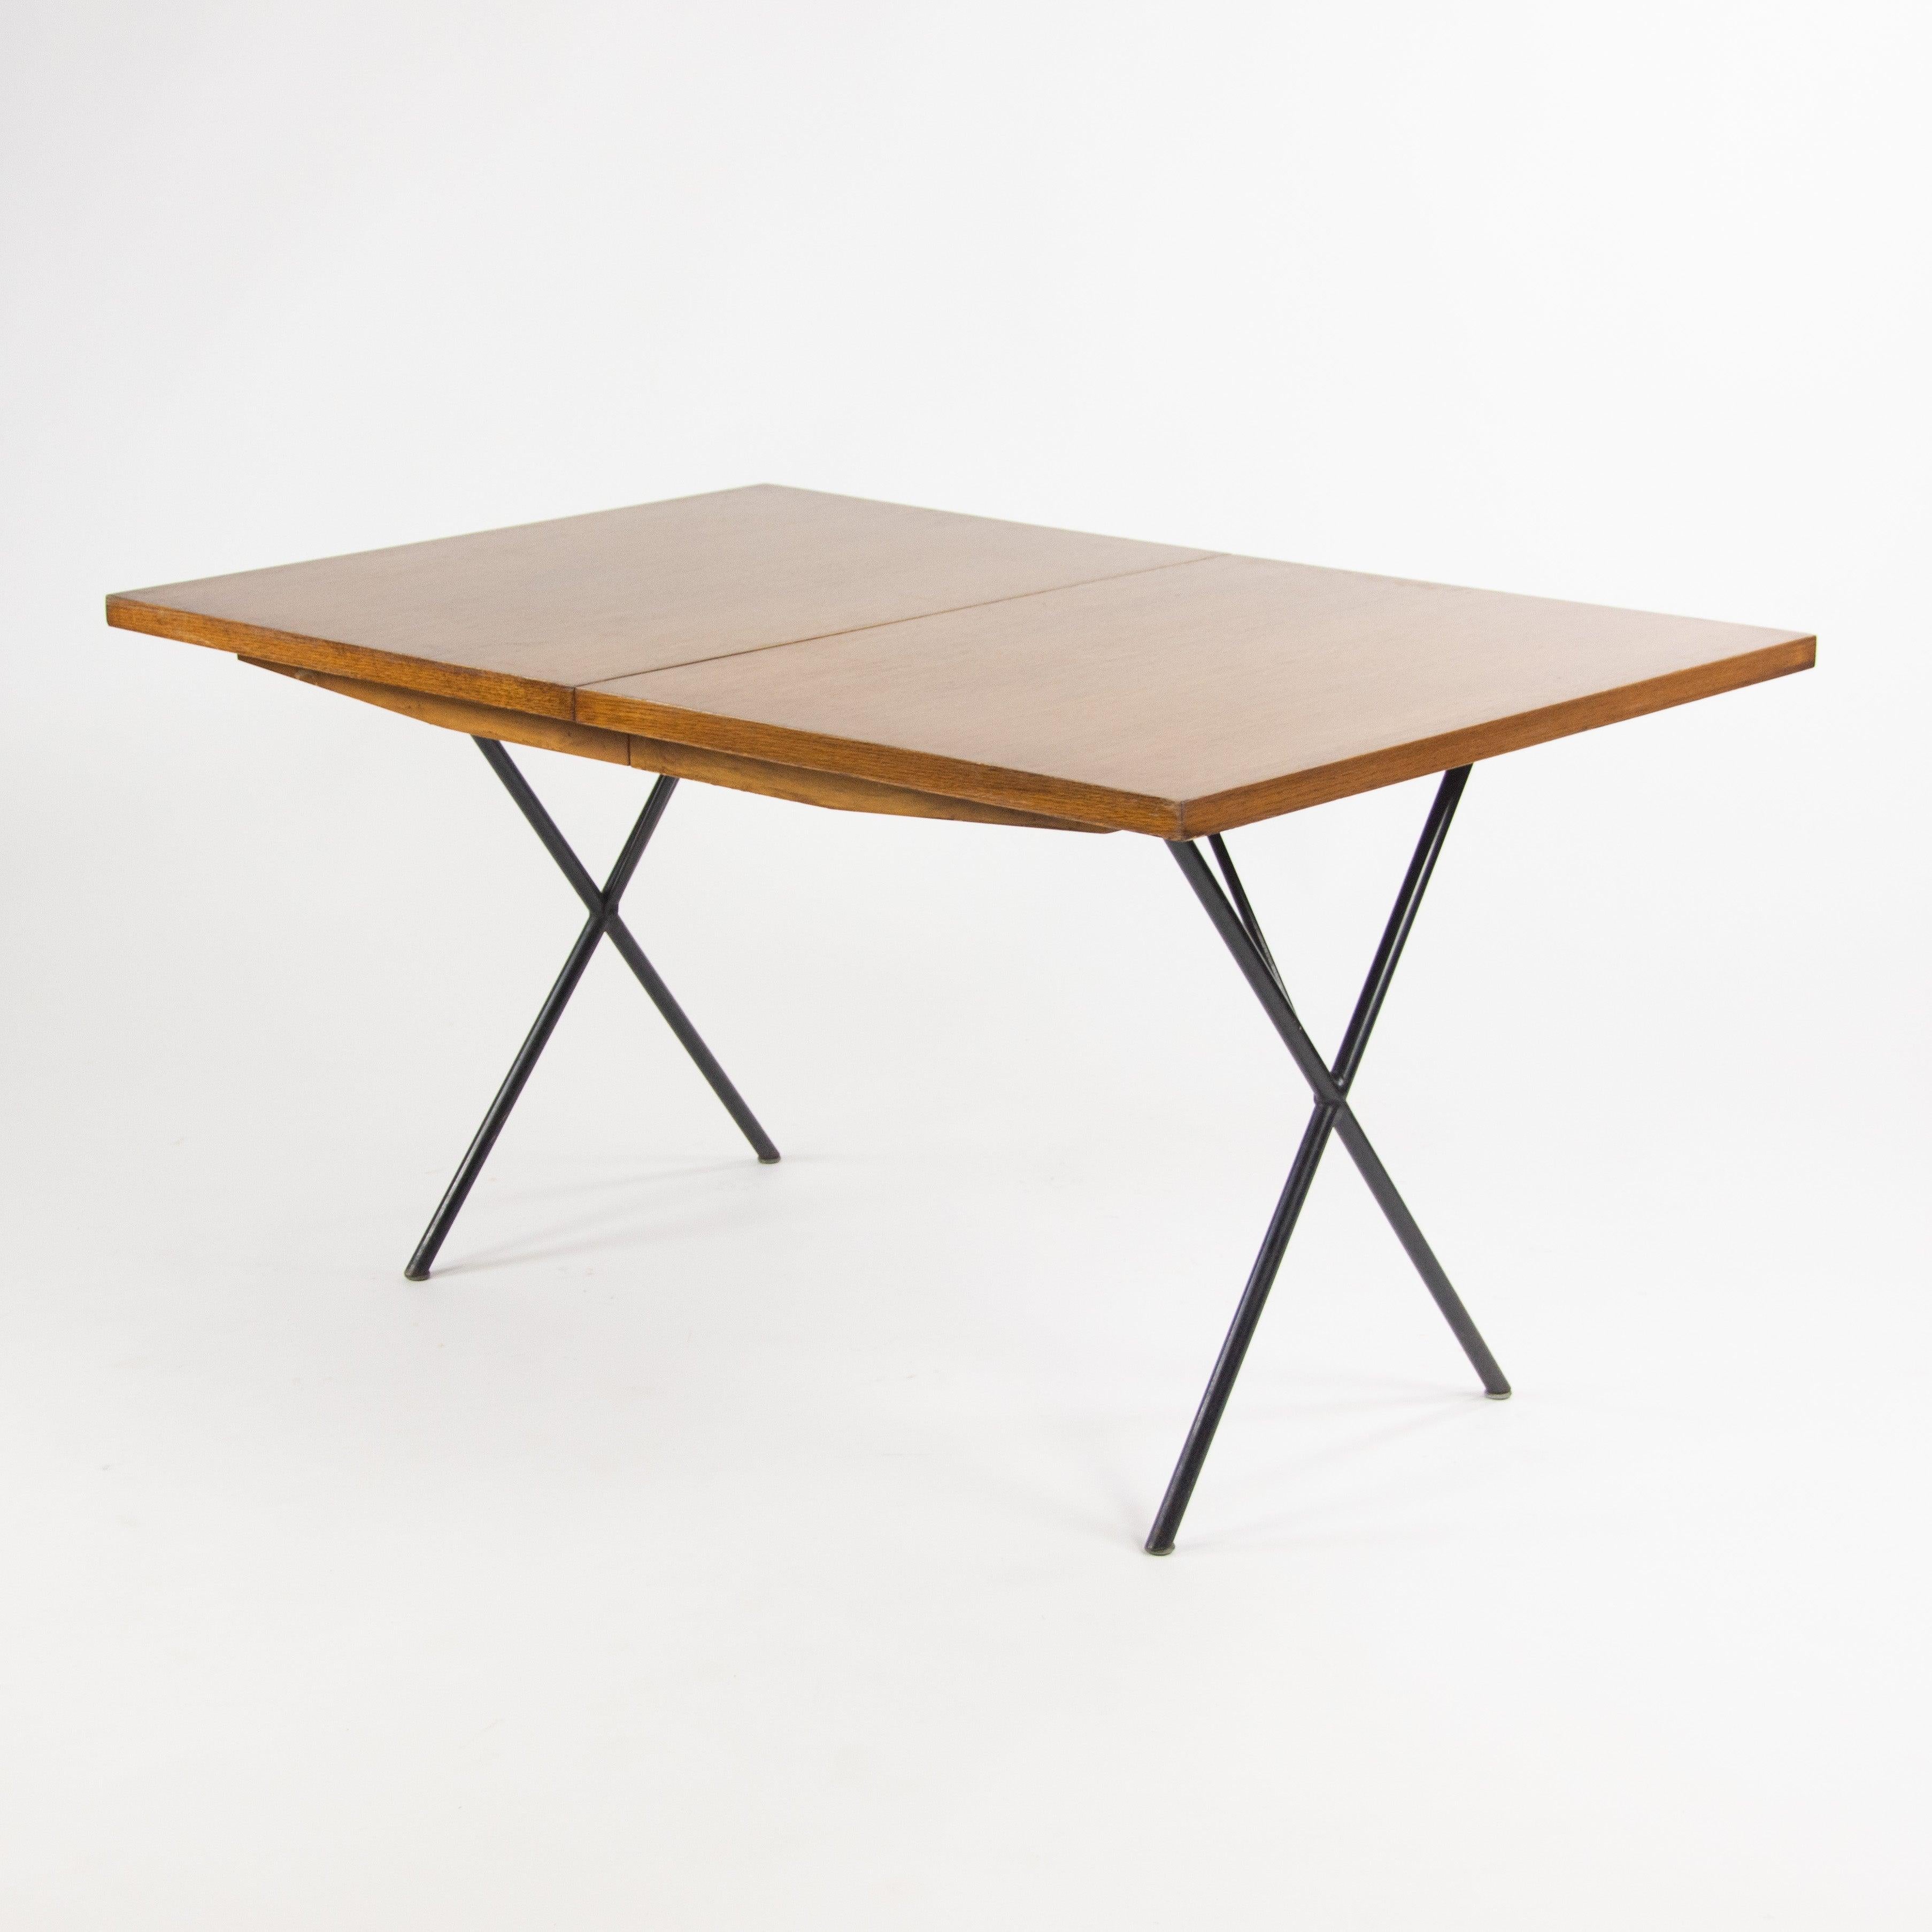 Modern 1950's Original George Nelson Herman Miller X Leg Extension Dining Table 5260 For Sale